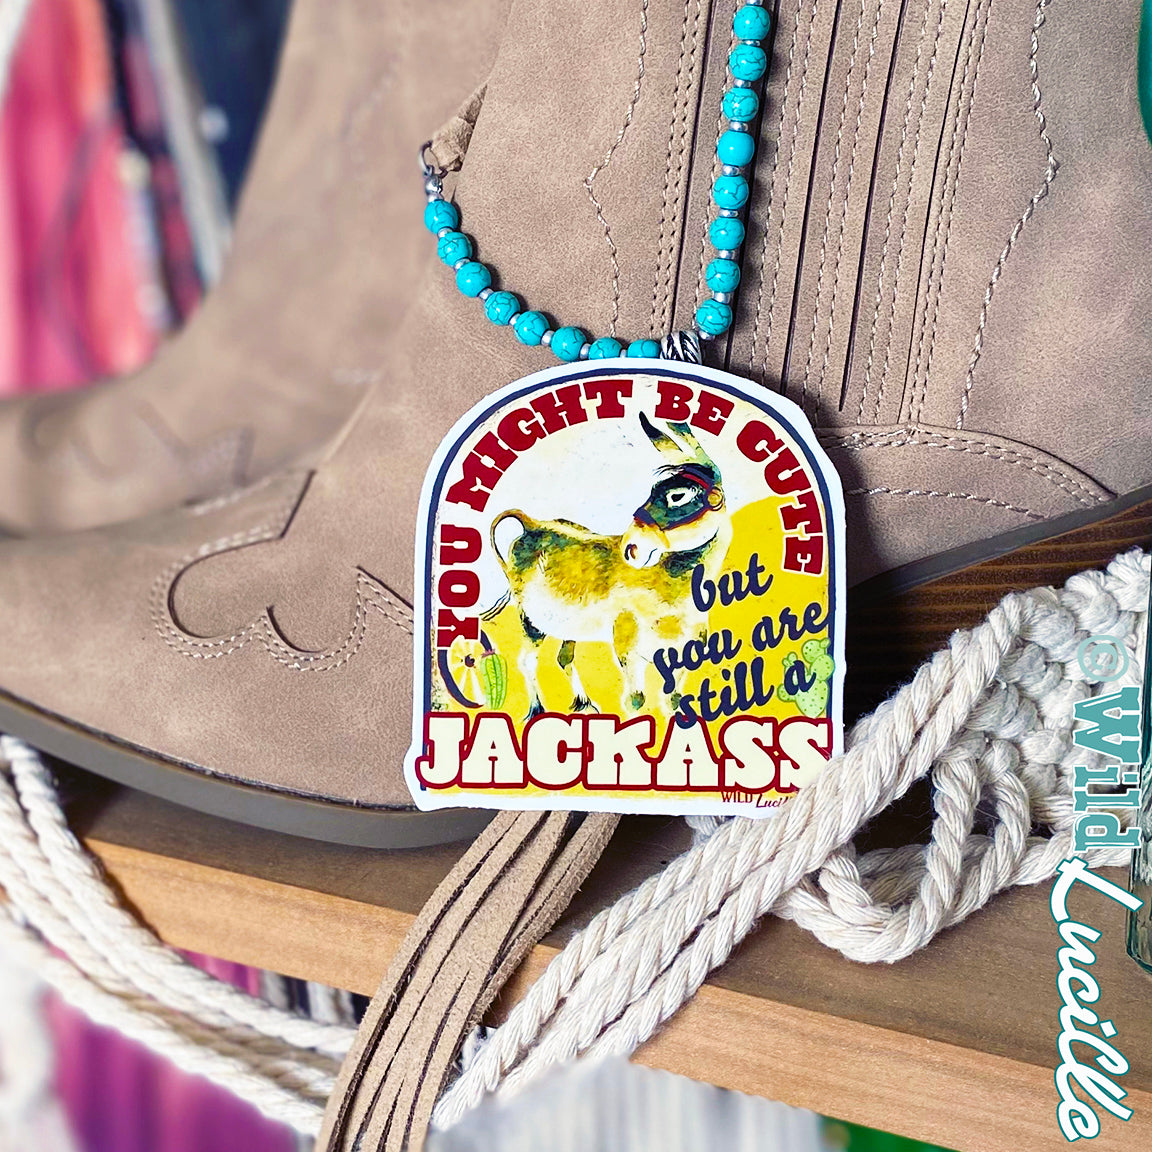 You Might Be Cute But You Are Still A Jackass - Sassy Western Vinyl Sticker Decal